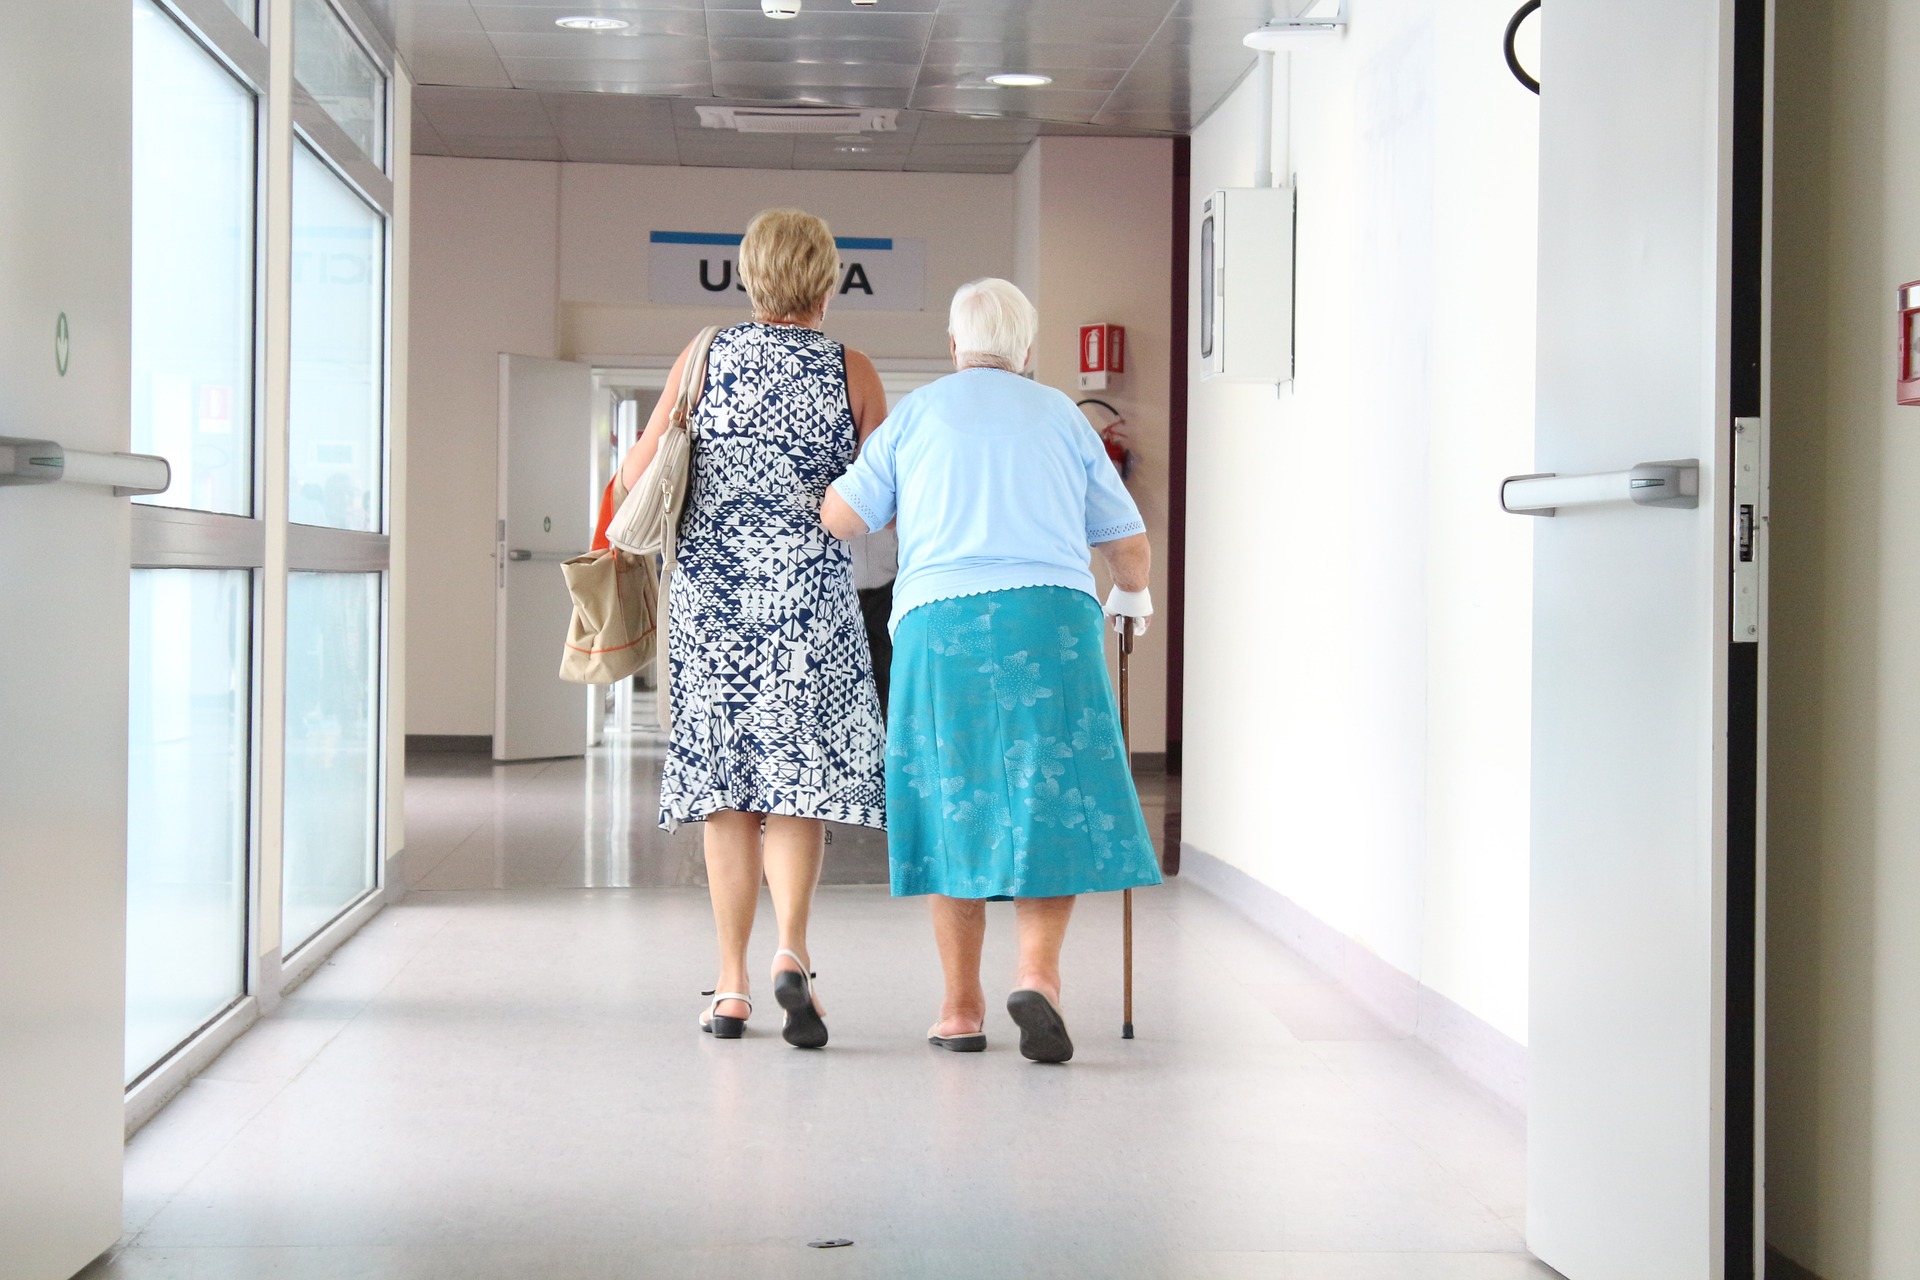 Elderly woman and younger woman walking in hospital